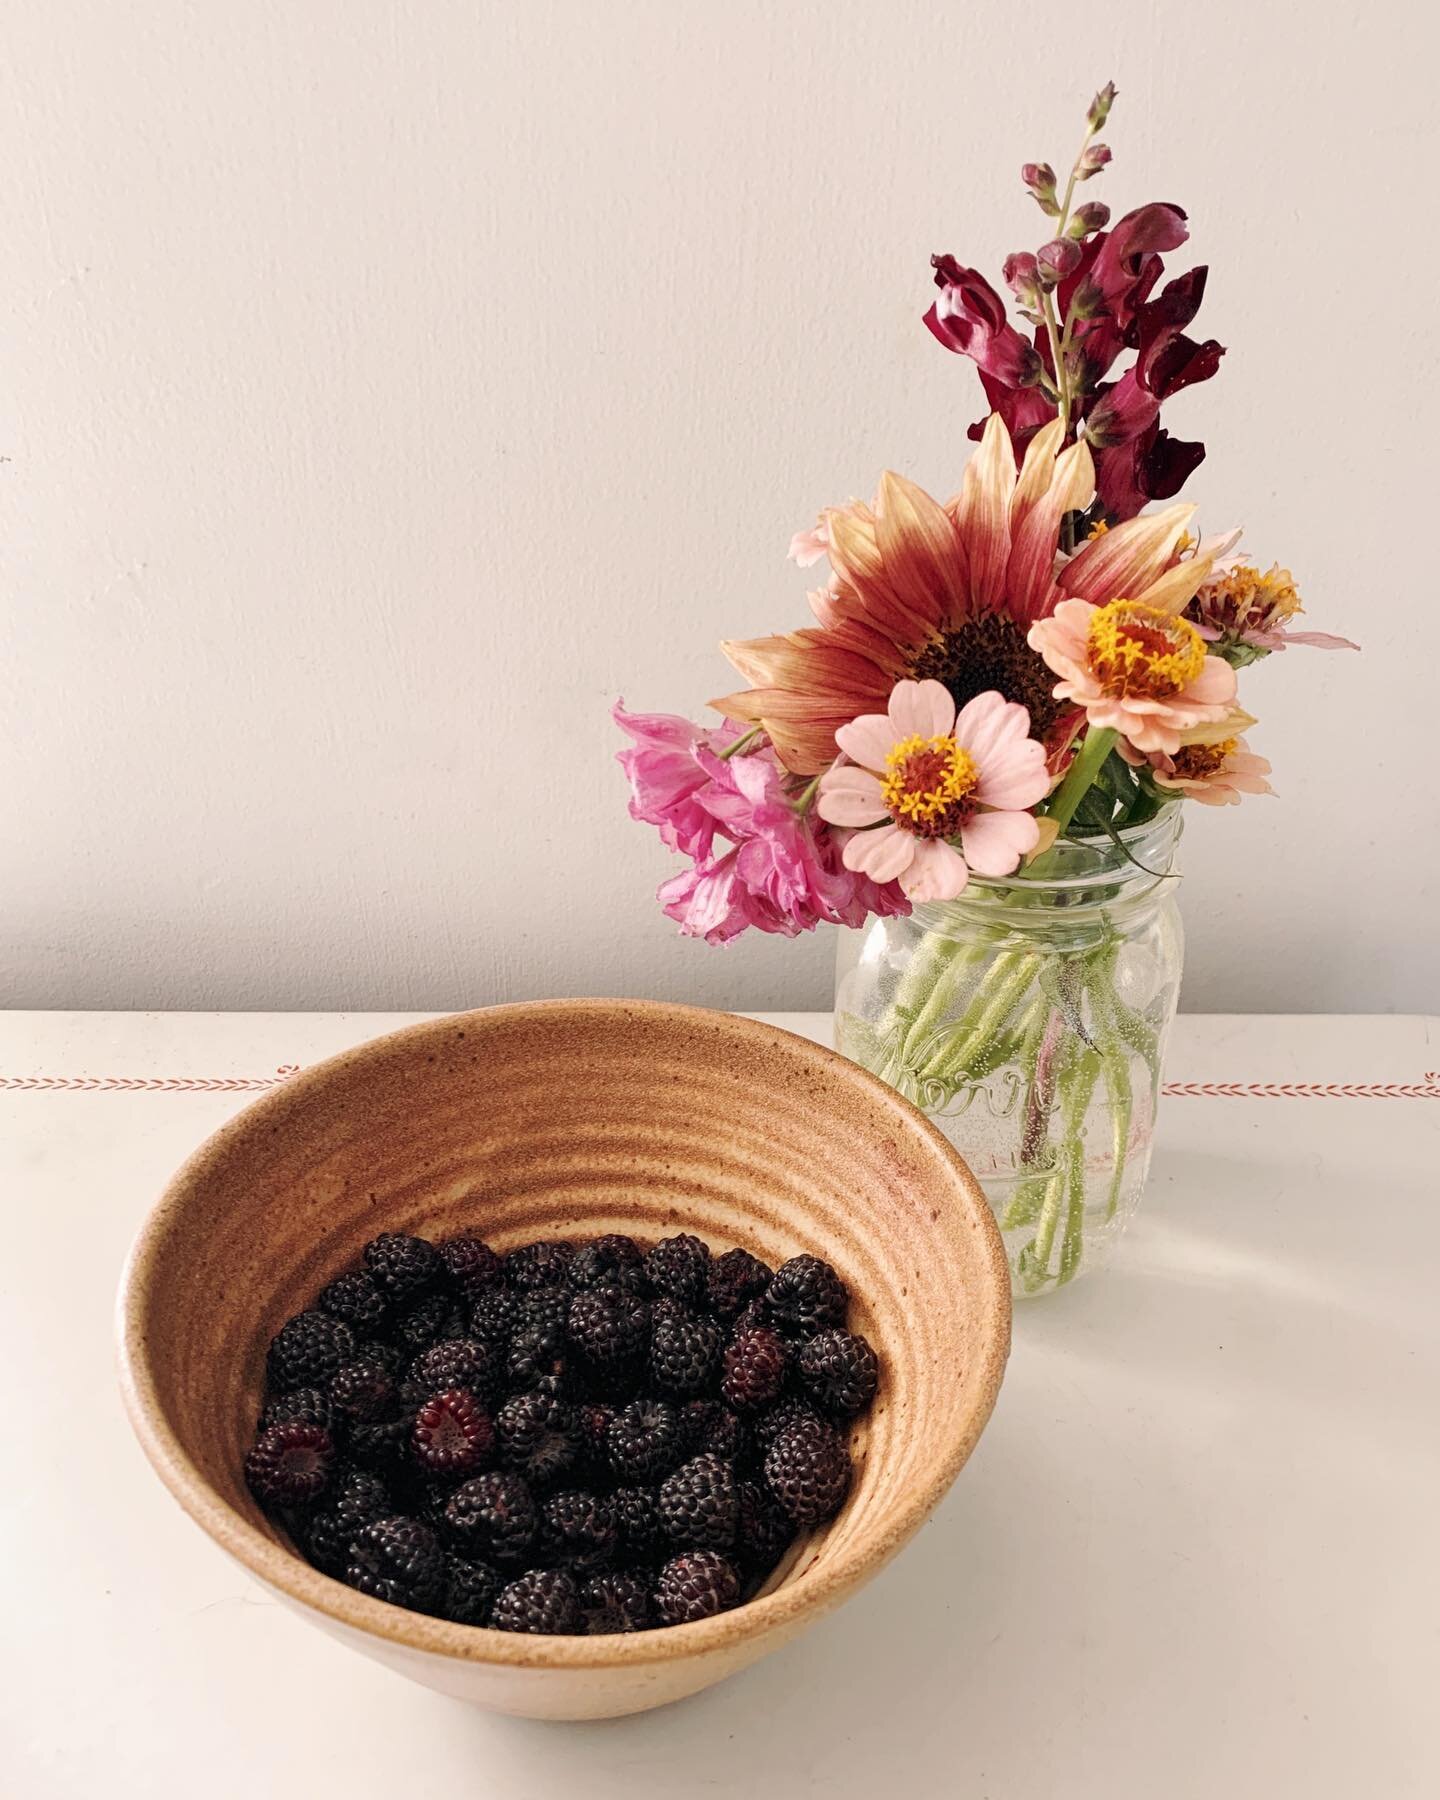 It&rsquo;s that glorious time of the year where I&rsquo;m harvesting both food (black raspberries today!) and flowers. I&rsquo;m off work (mostly) this week for my birthday&mdash; it was too darn hot to spend much time outside during the my actual bi